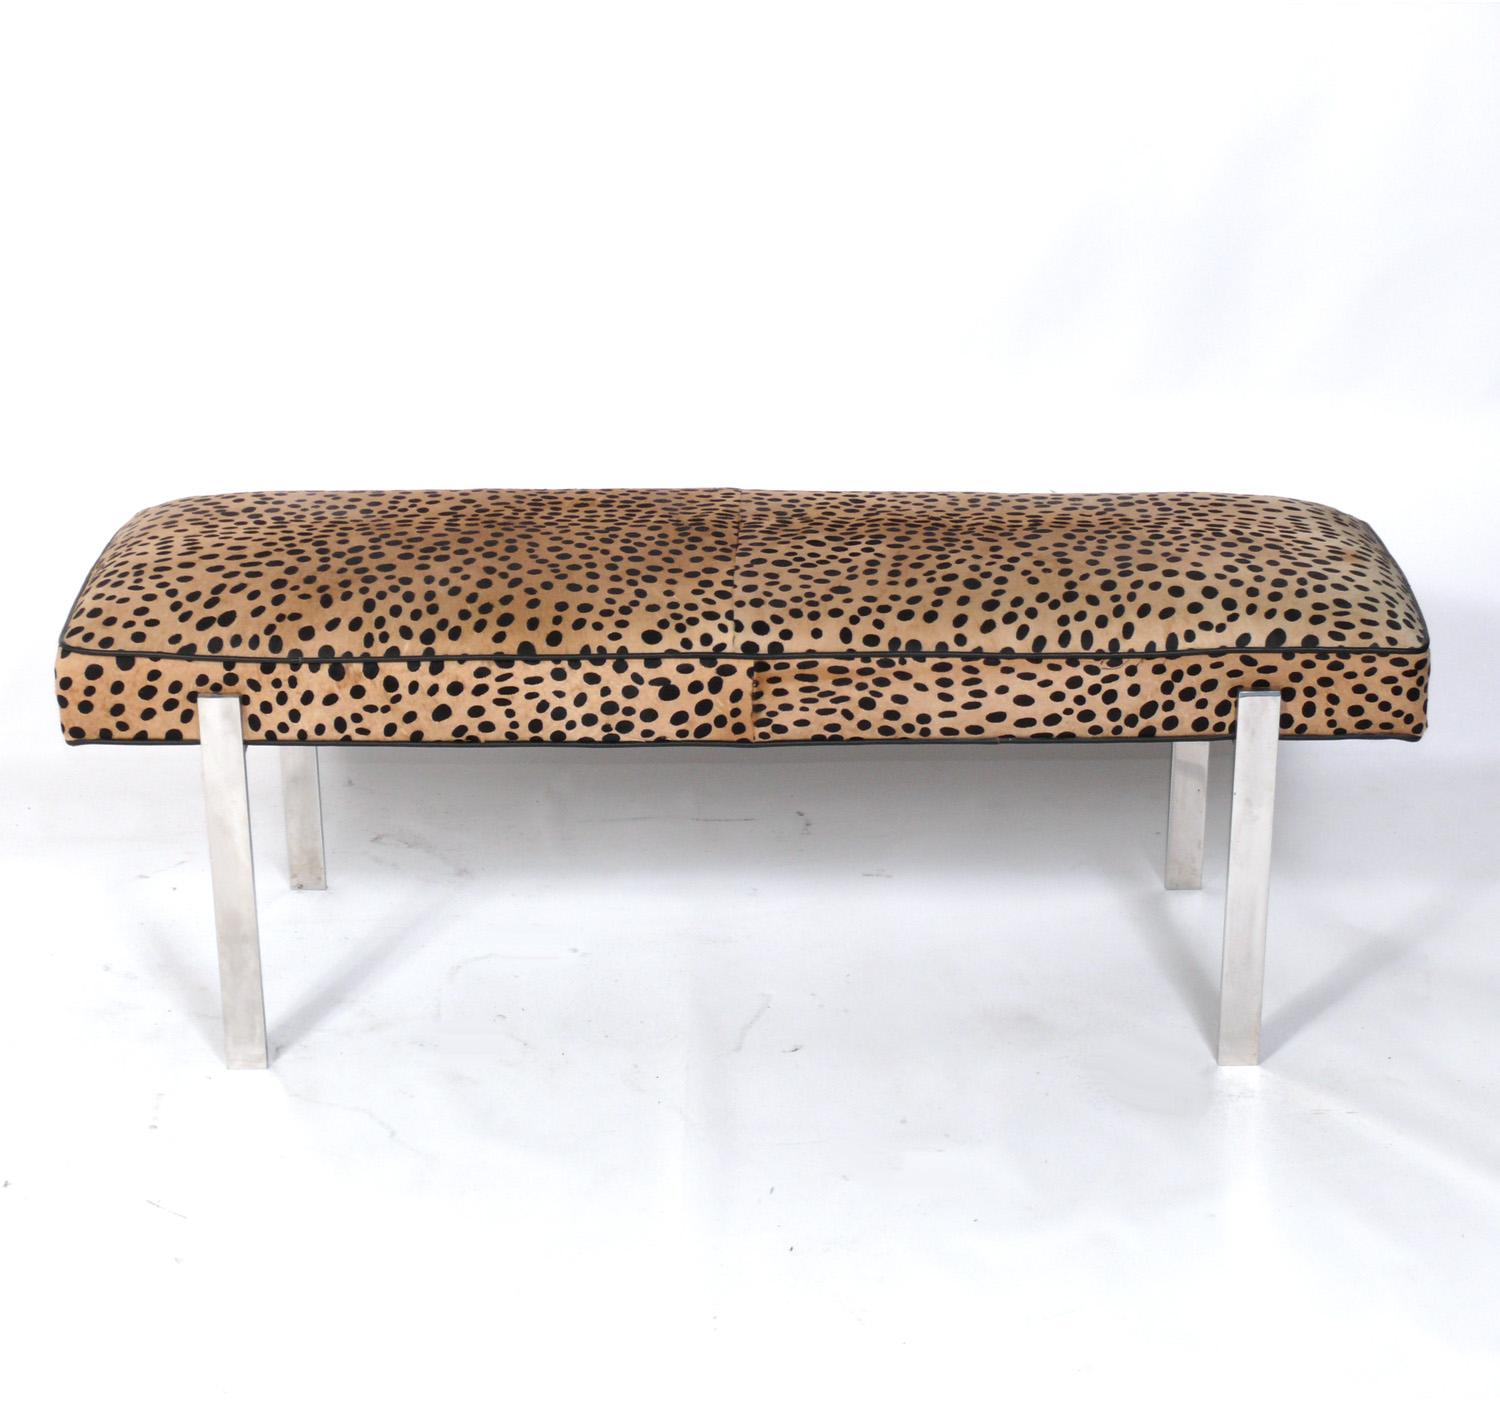 Clean Lined Chrome bench, circa 1980s. High quality construction with heavyweight chrome frame and faux cheetah print hair on hide upholstery.